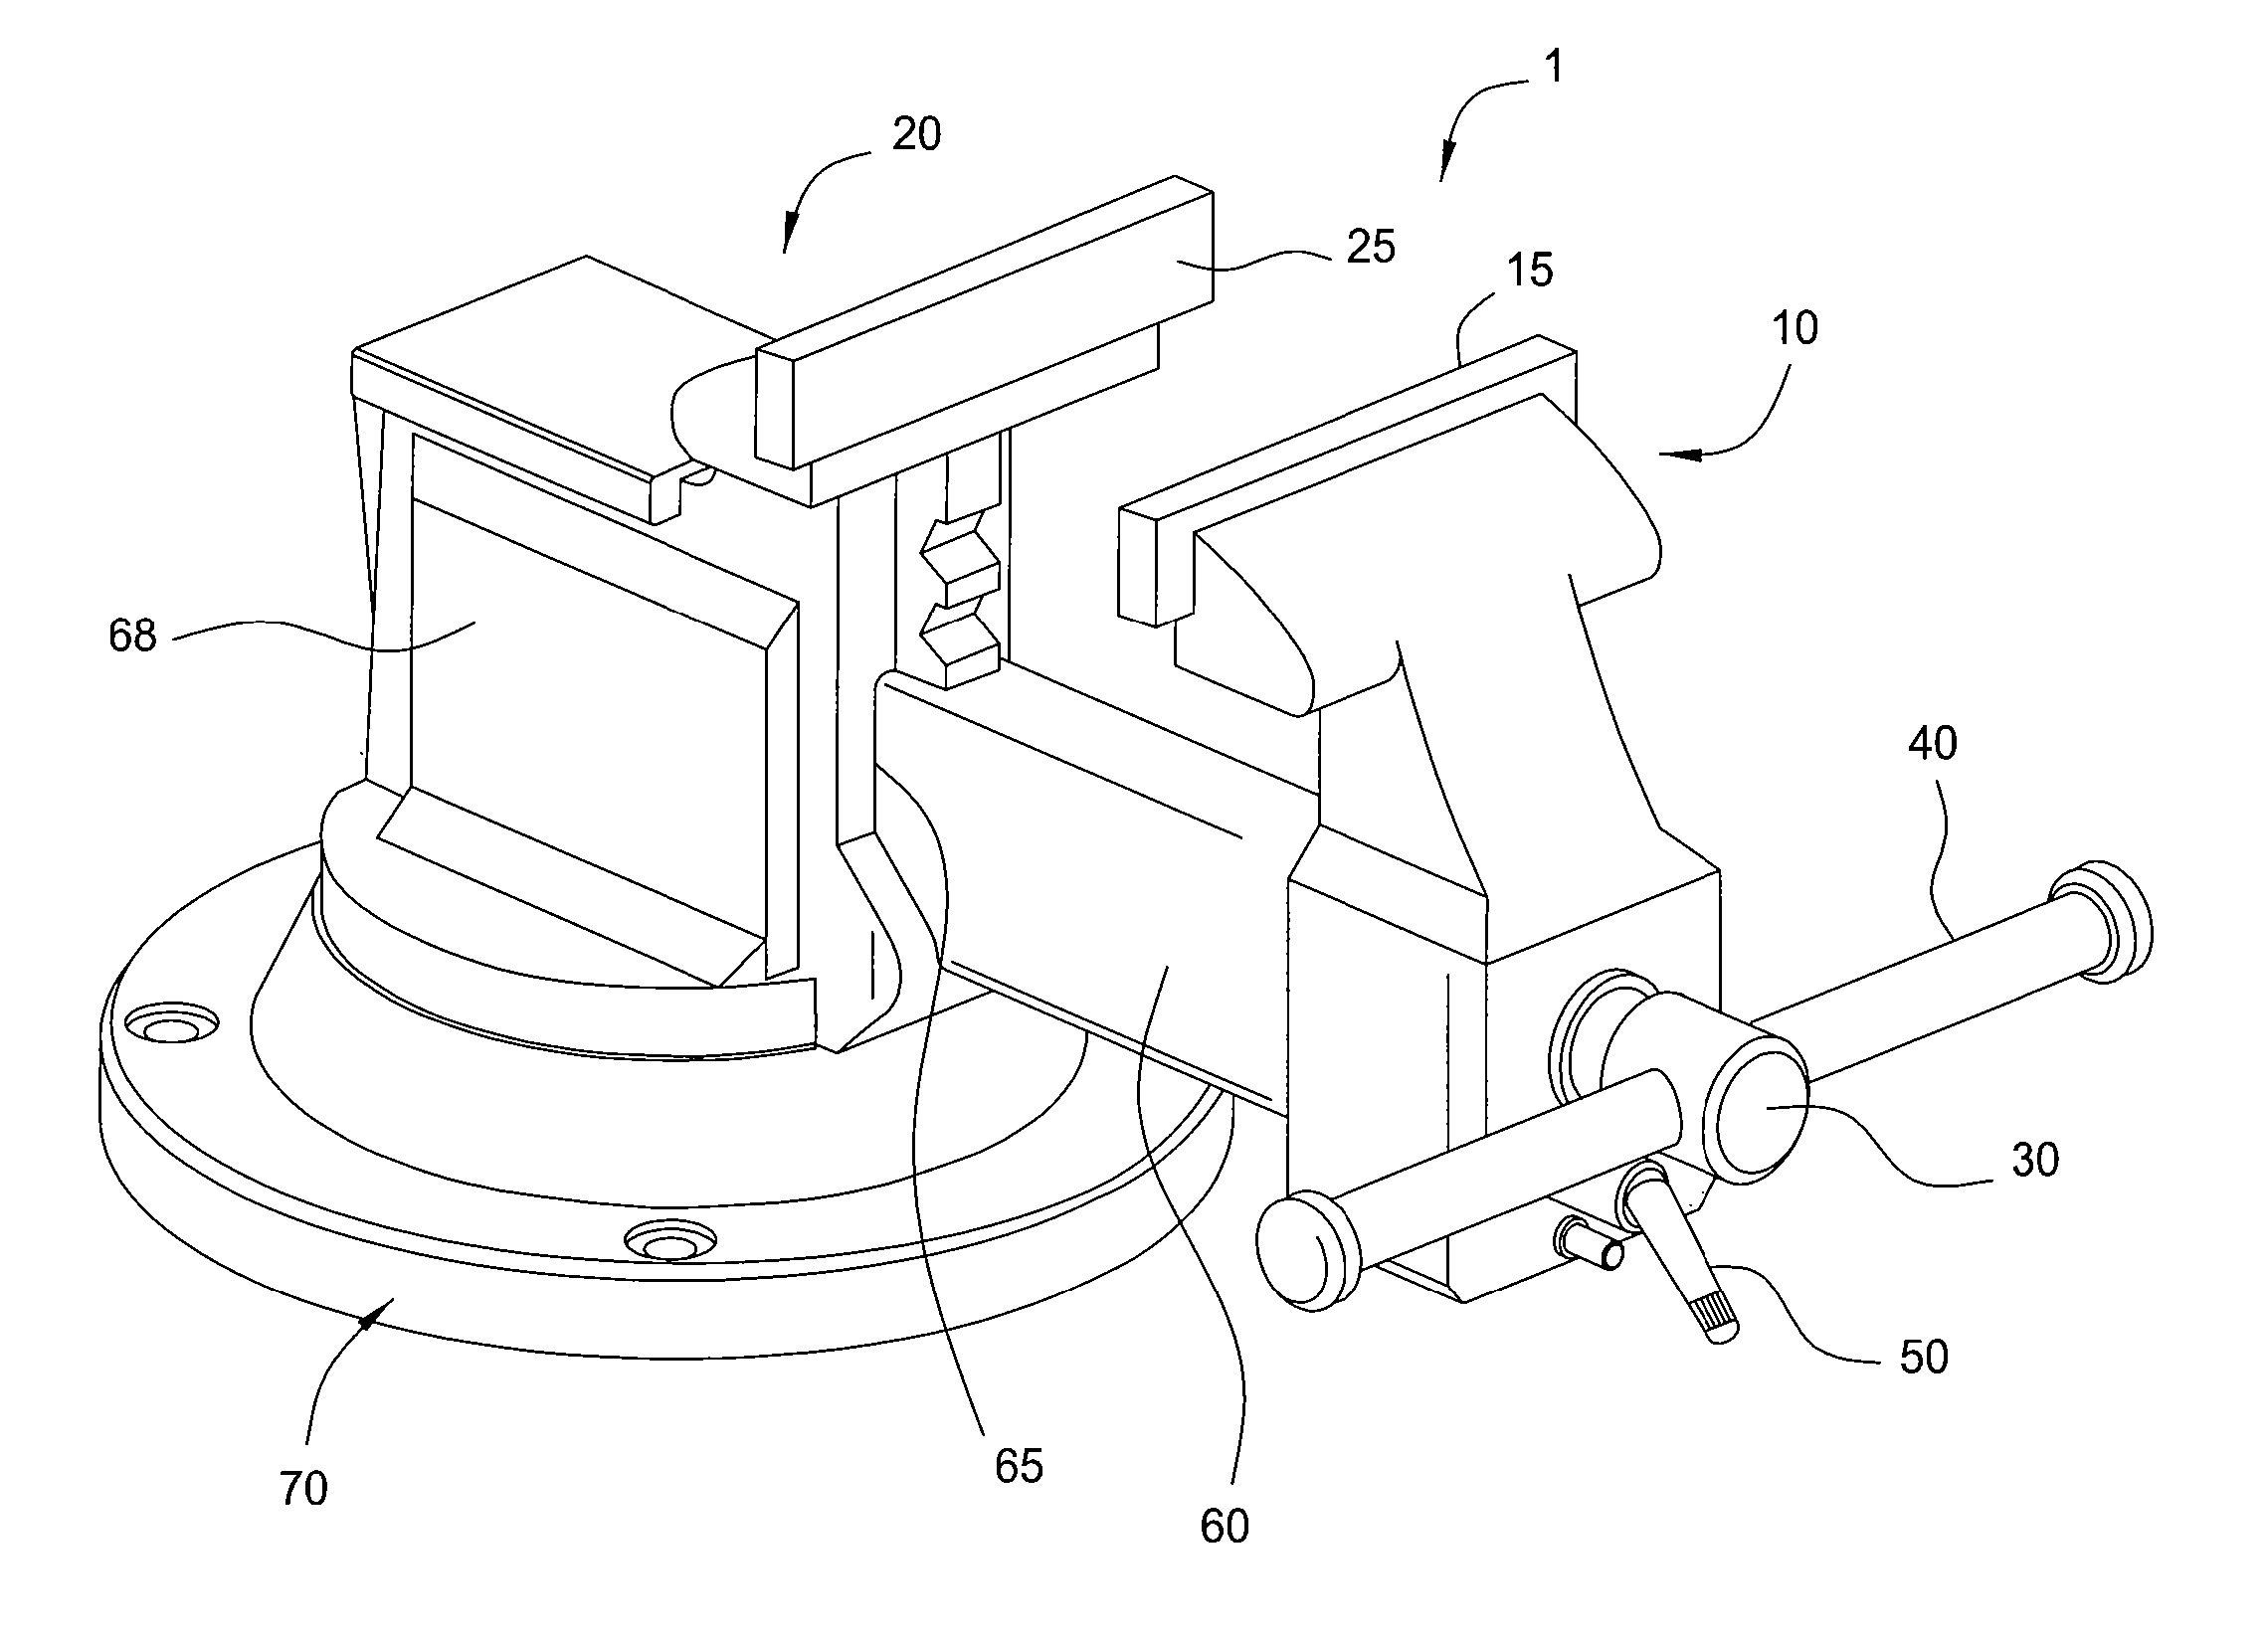 Vise with quick release feature